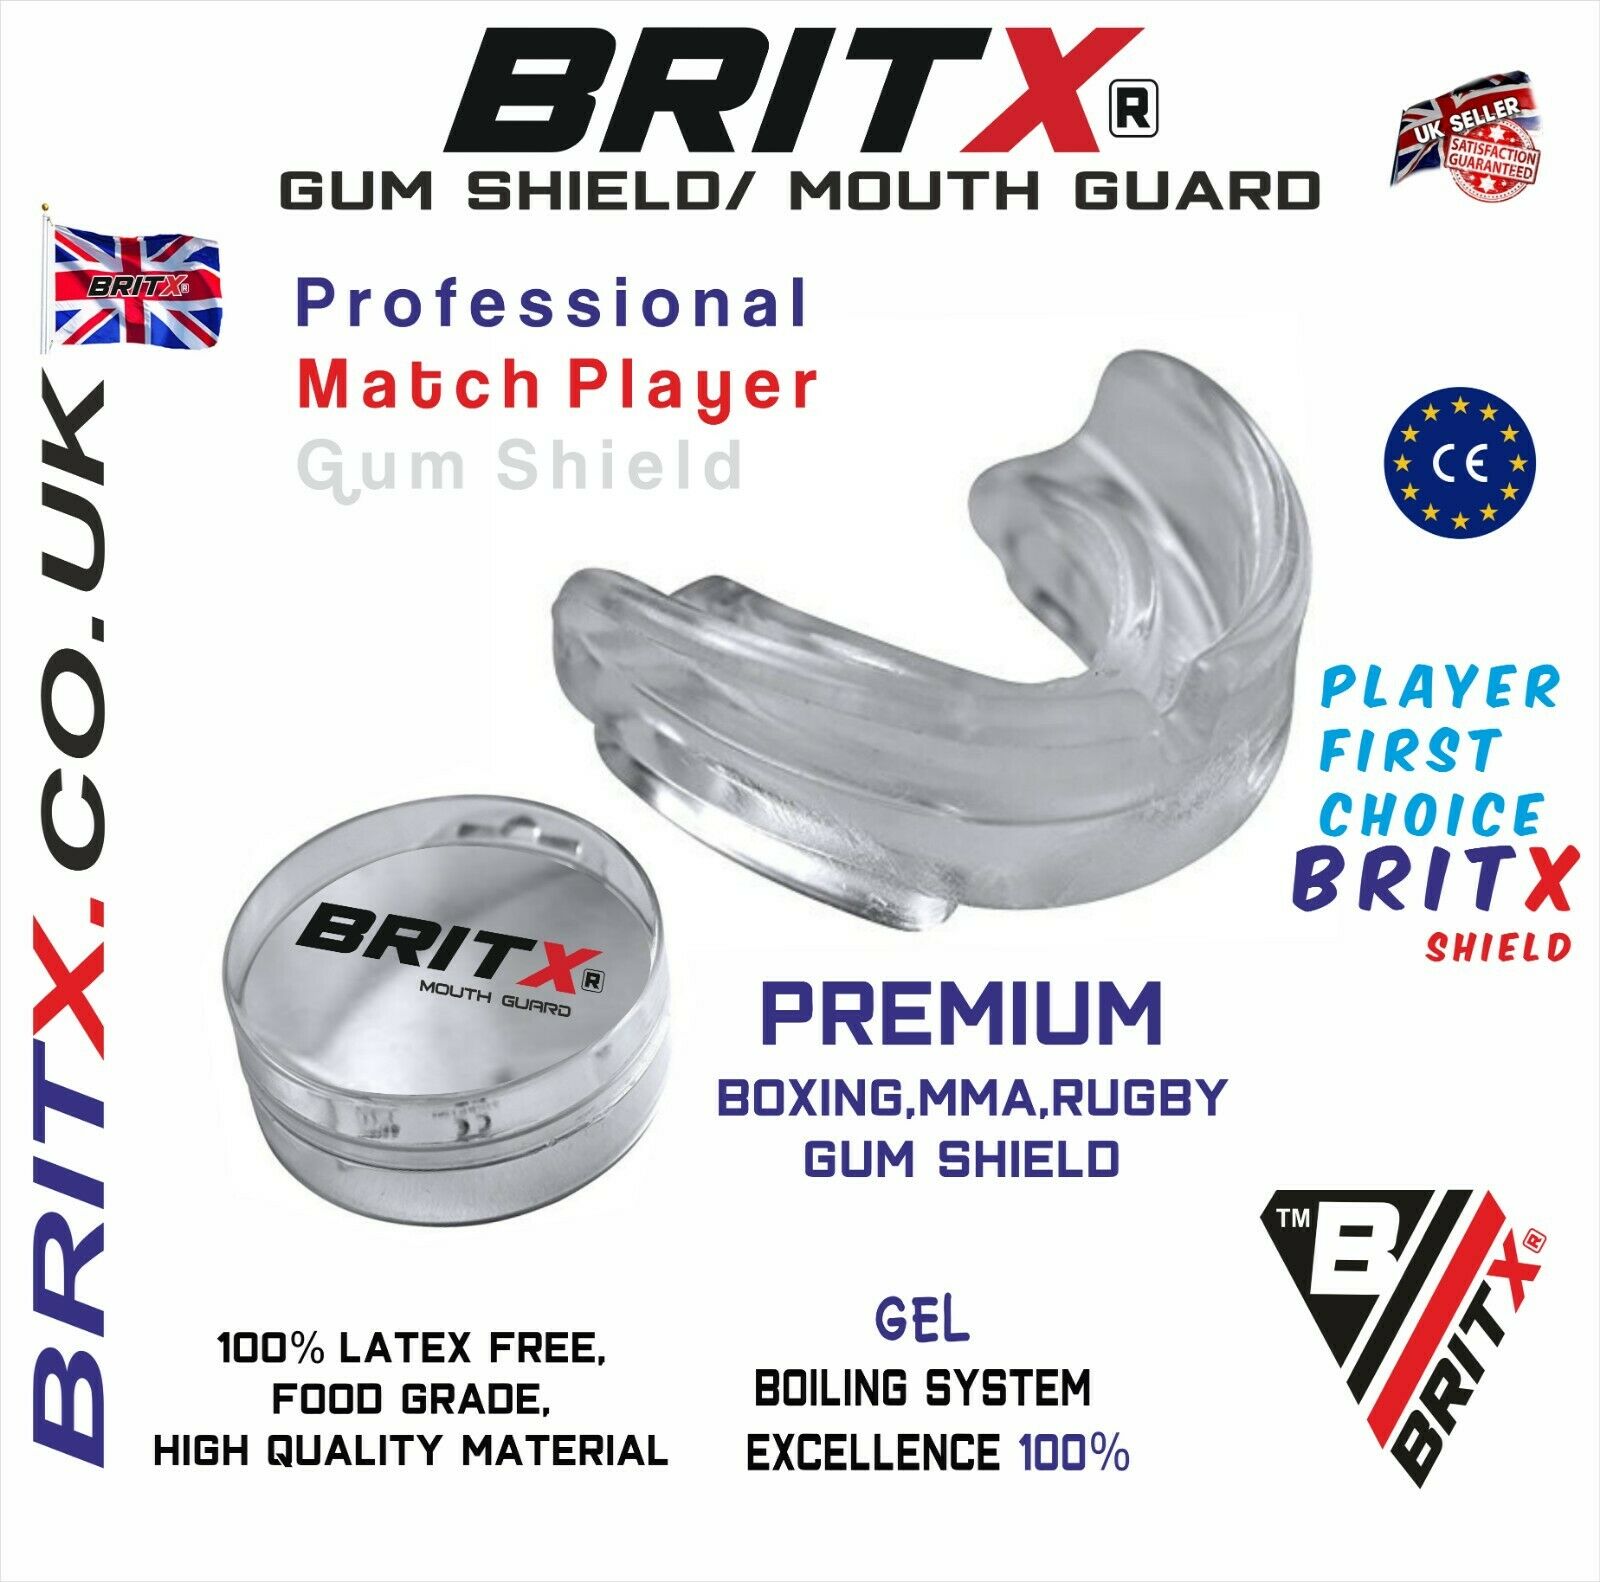 Gel Gum Mouth Guard Shield Cases Teeth Grinding Boxing MMA Sports MouthPiece UK 